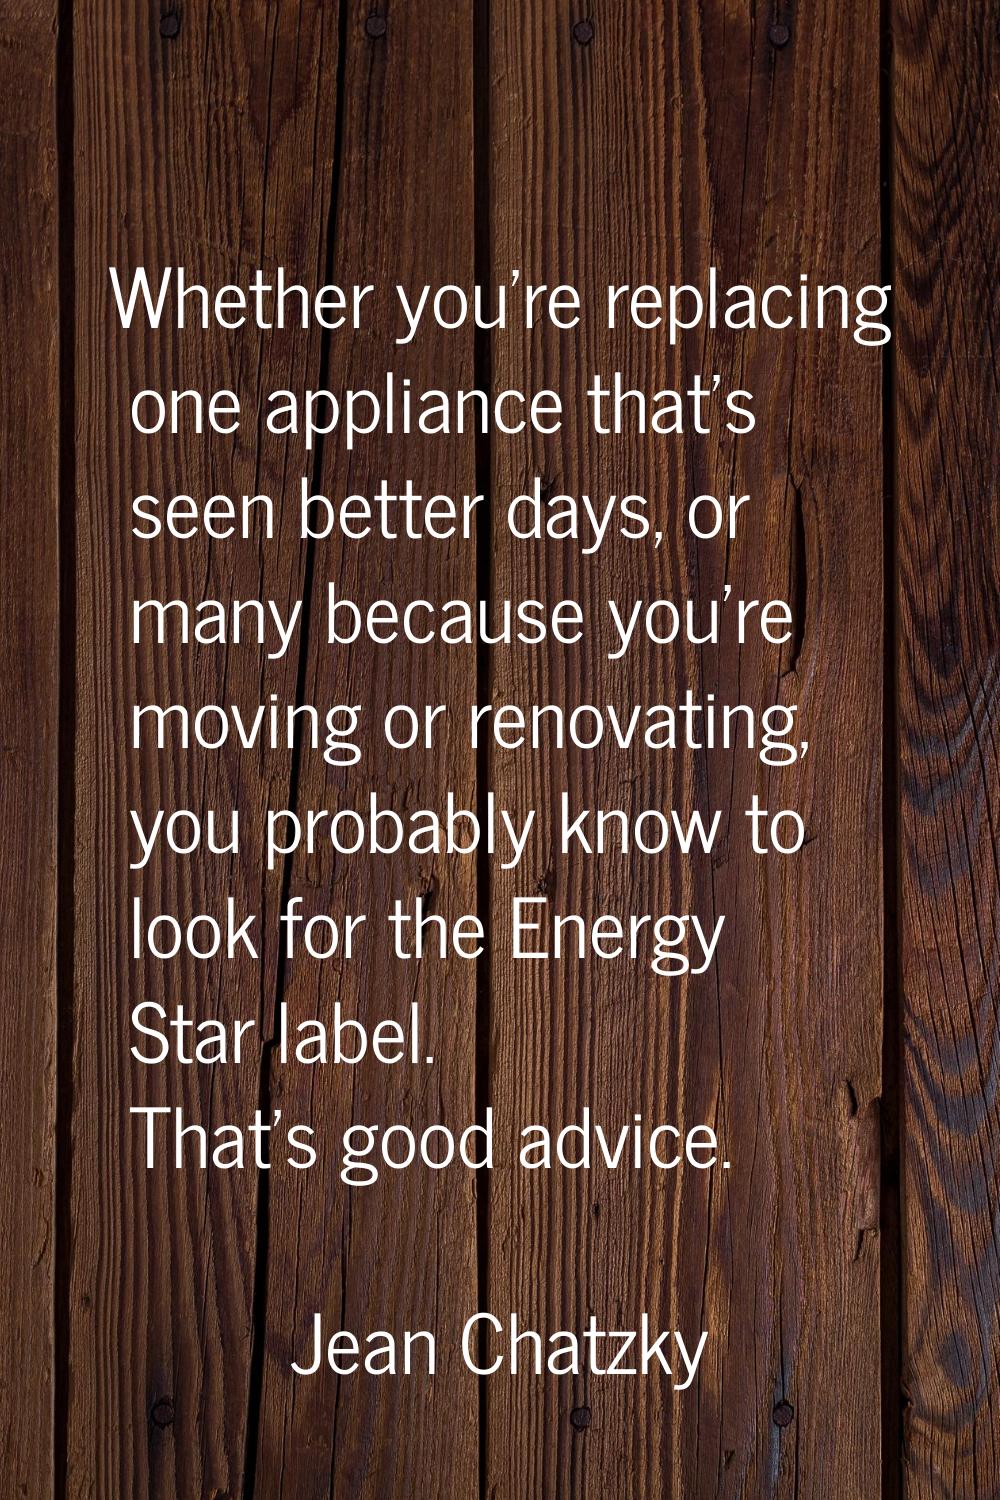 Whether you're replacing one appliance that's seen better days, or many because you're moving or re